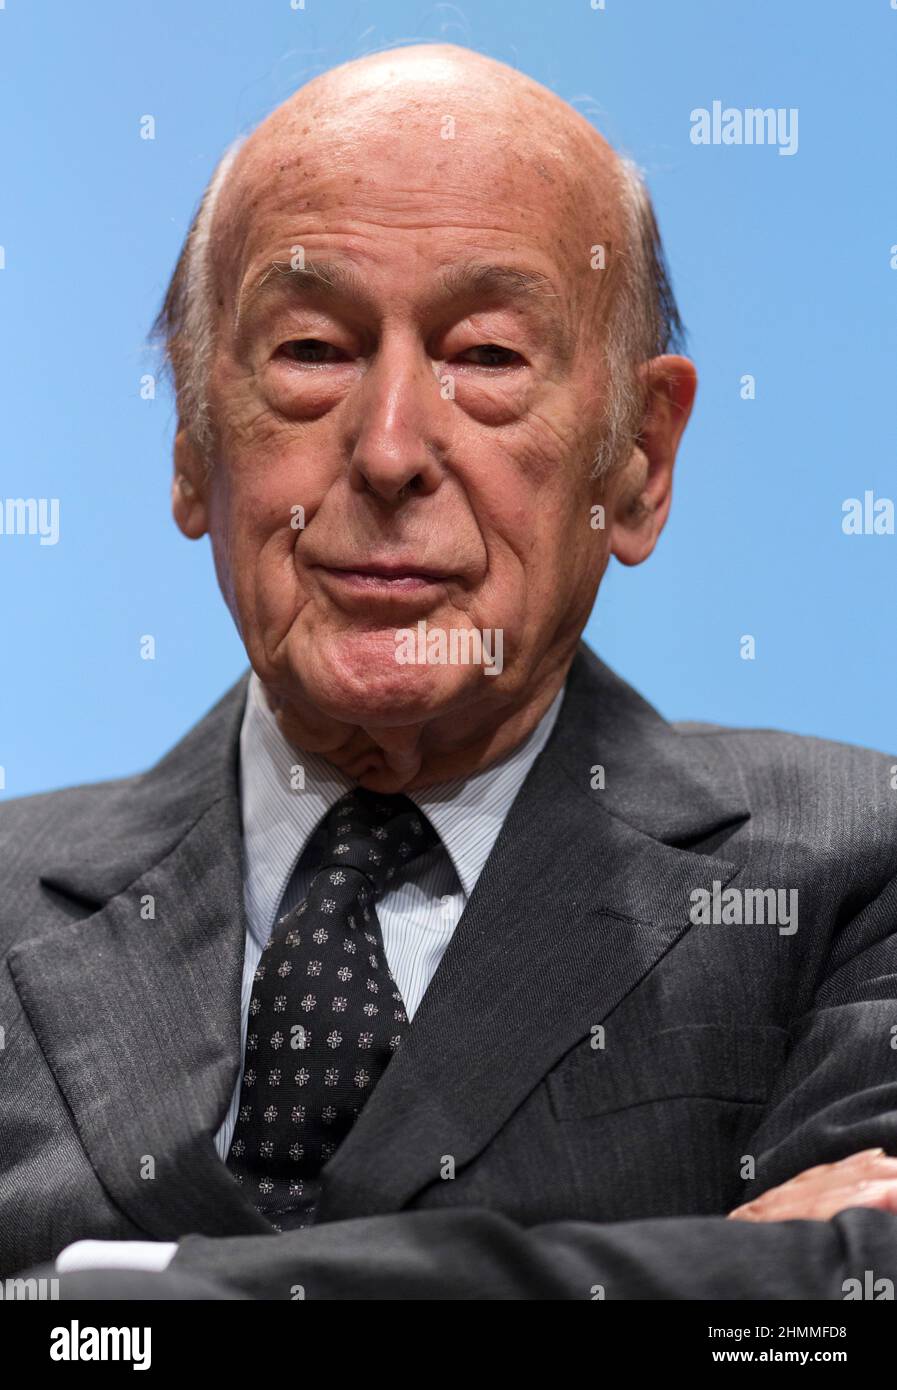 Belgium, Brussels, on October 10, 2013: ÒReinvent EuropeÓ, an event organized by the magazine Le Nouvel Observateur, with Valery Giscard d'Estaing, former President of the French Republic Stock Photo